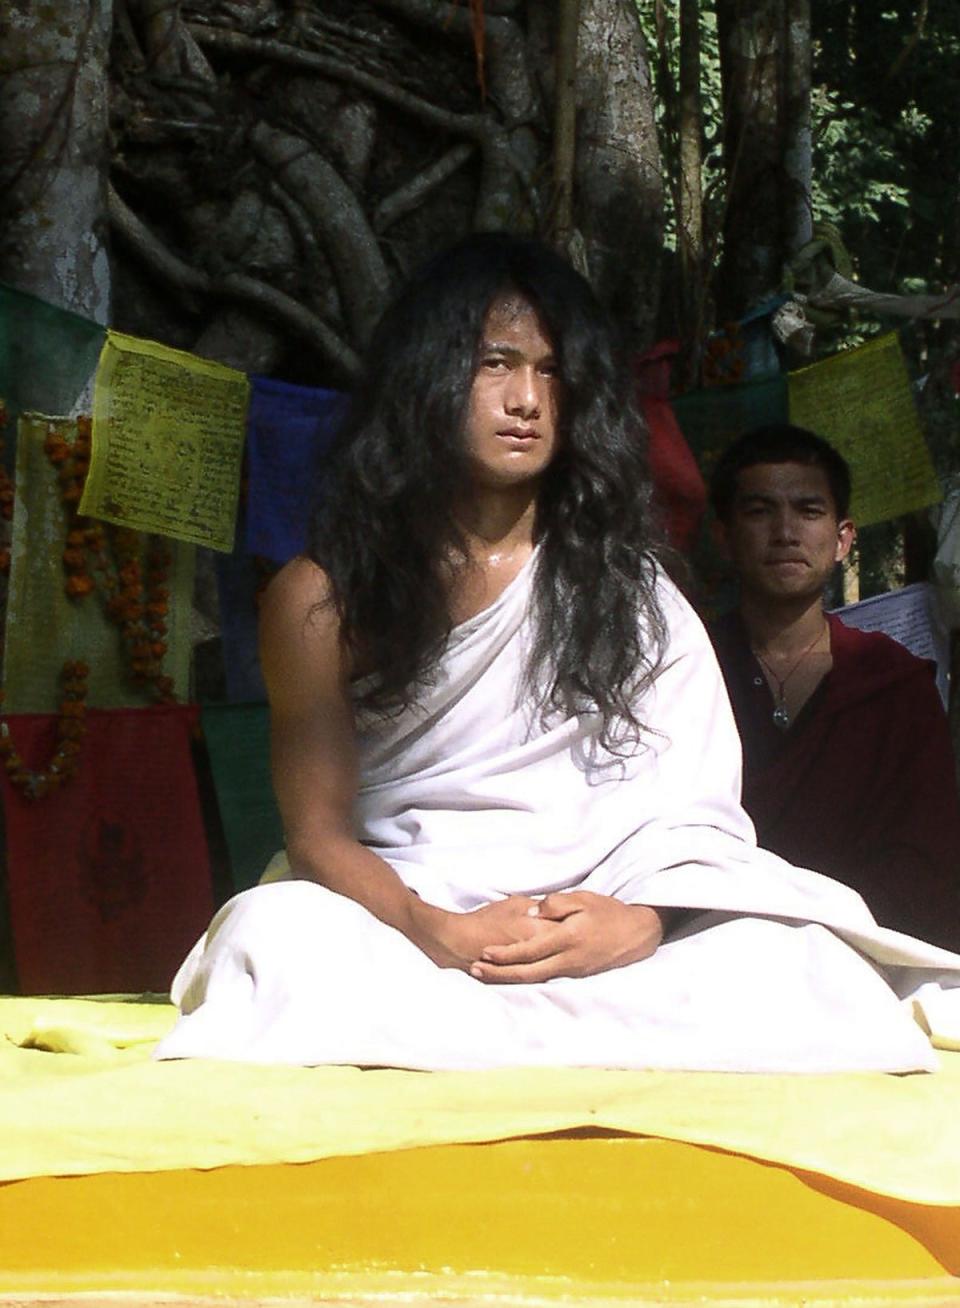 Nepali spiritual leader Ram Bahadur Bomjan, dubbed “Buddha Boy”, sits under a tree before an audience gathered to listen to his sermon in Ratanpuri (AFP/Getty Images)